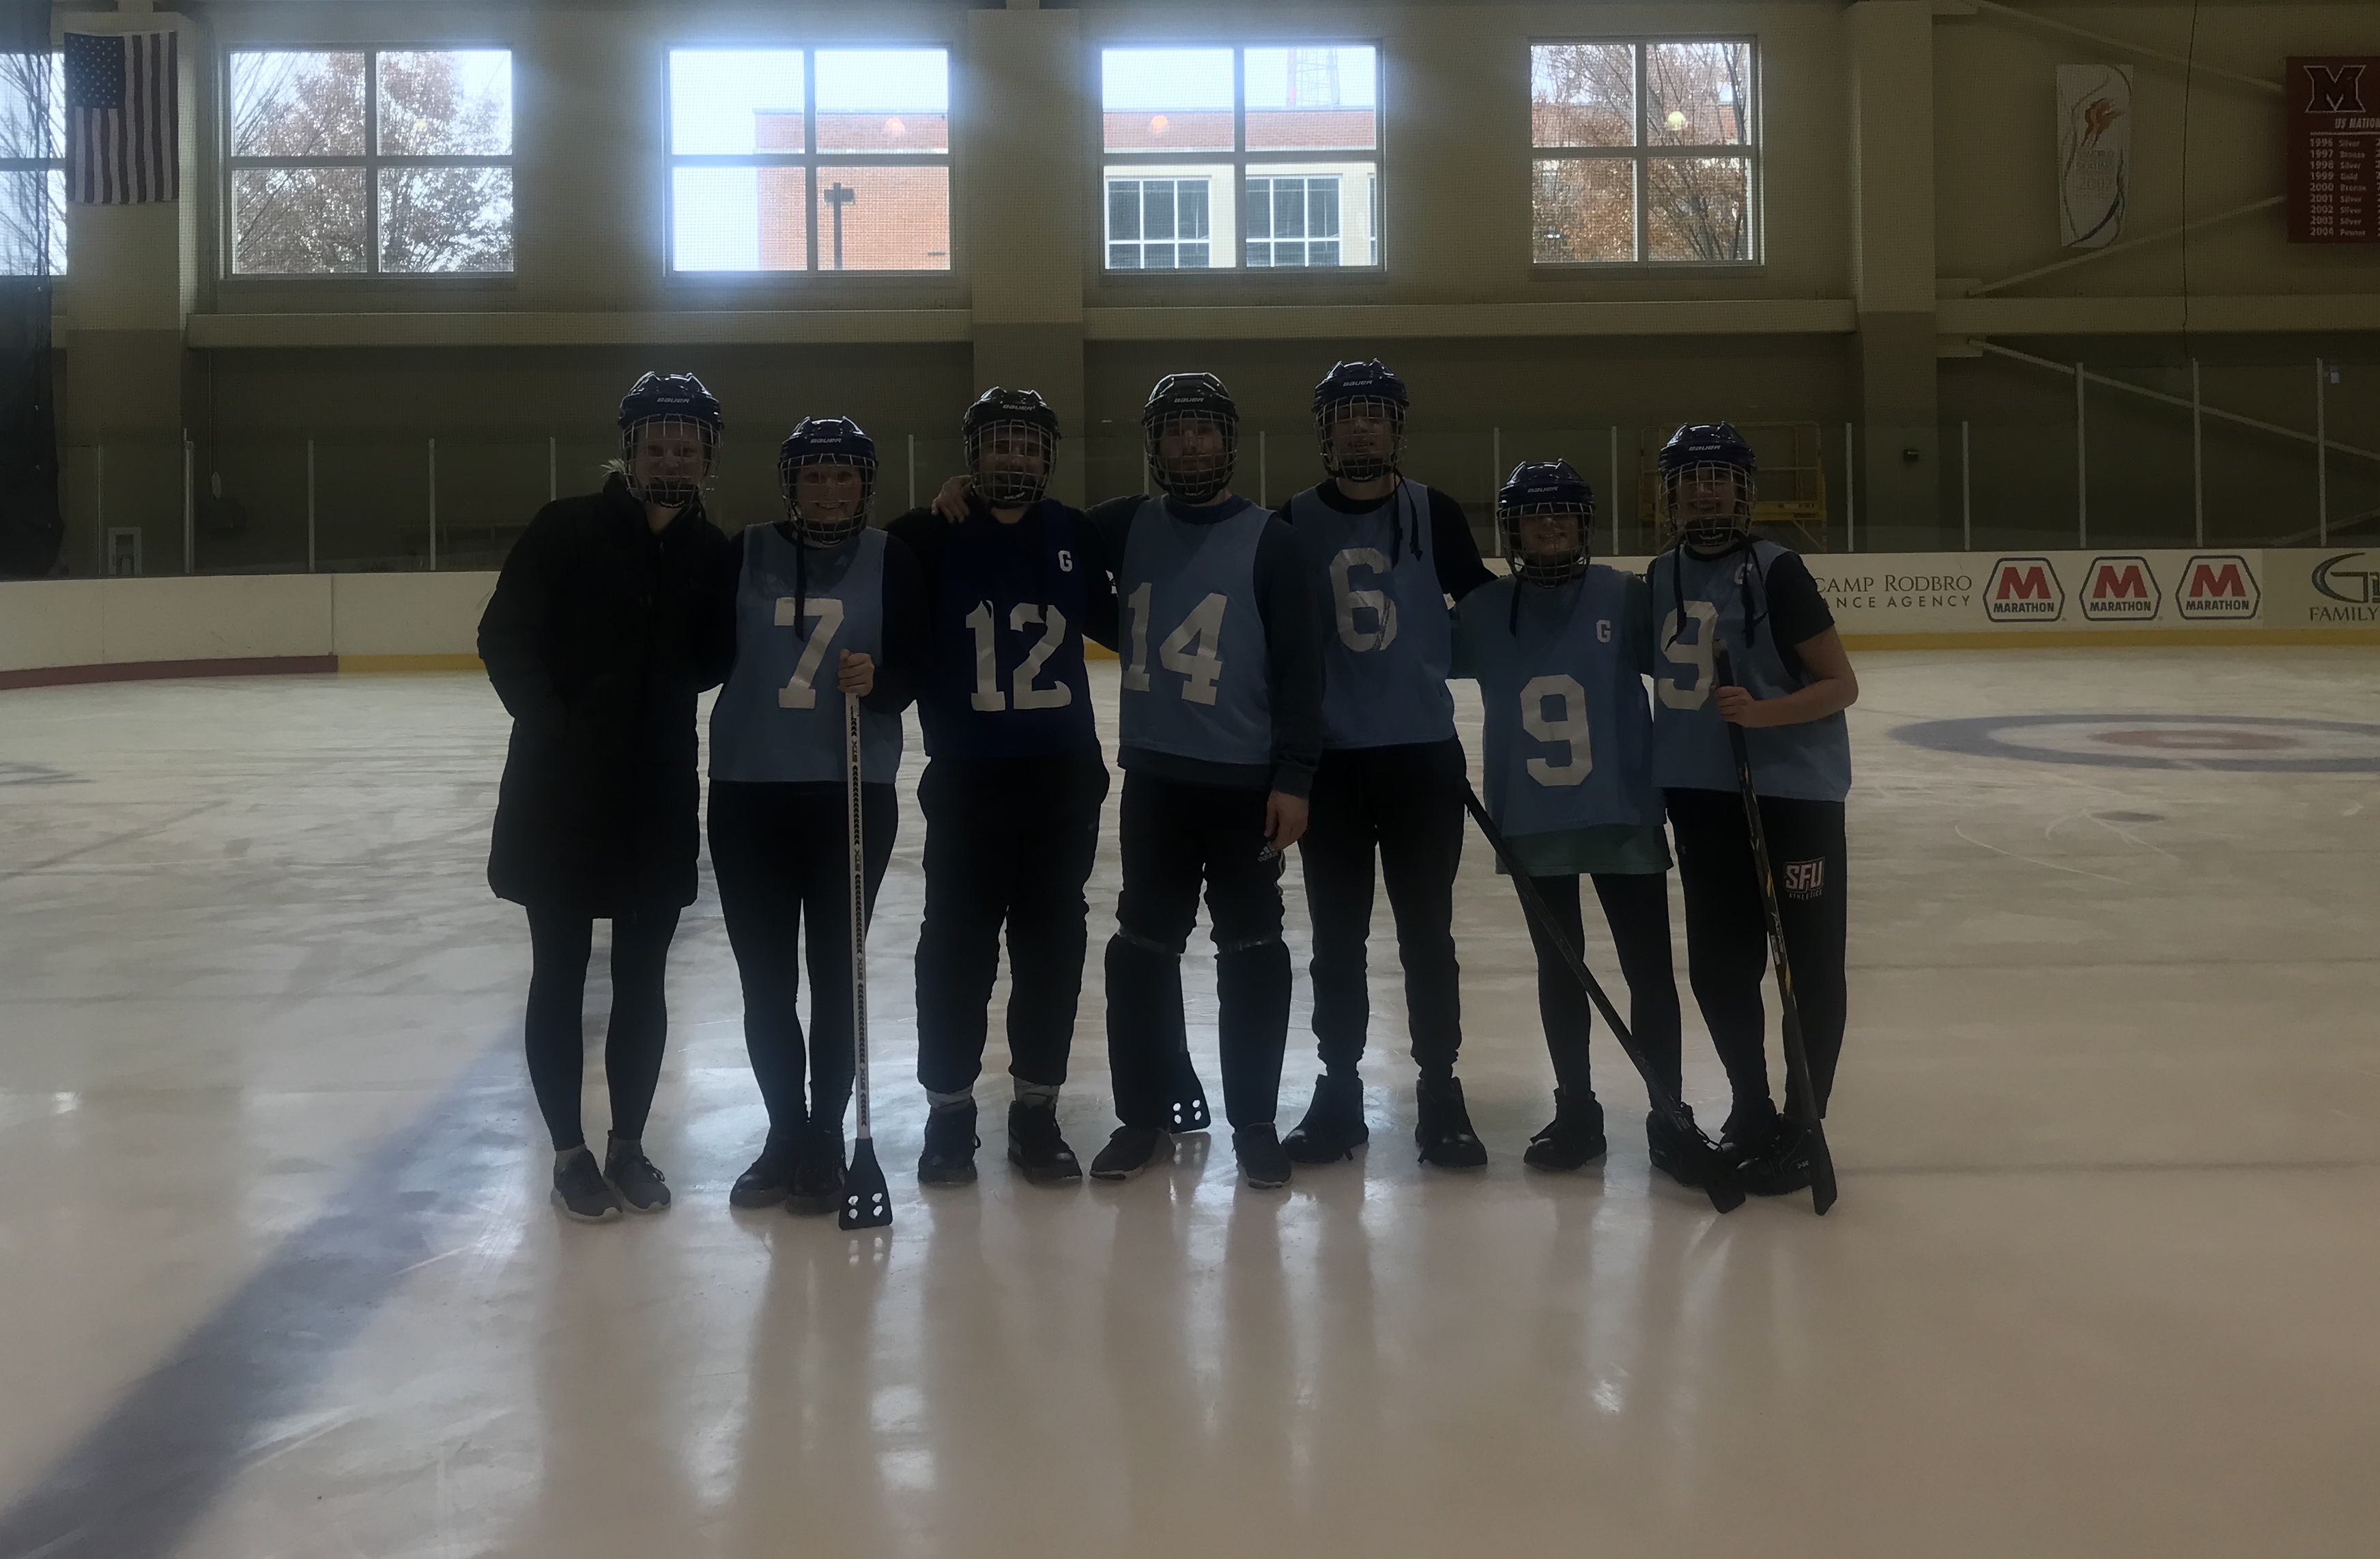 OH XI chapter's older broomball team